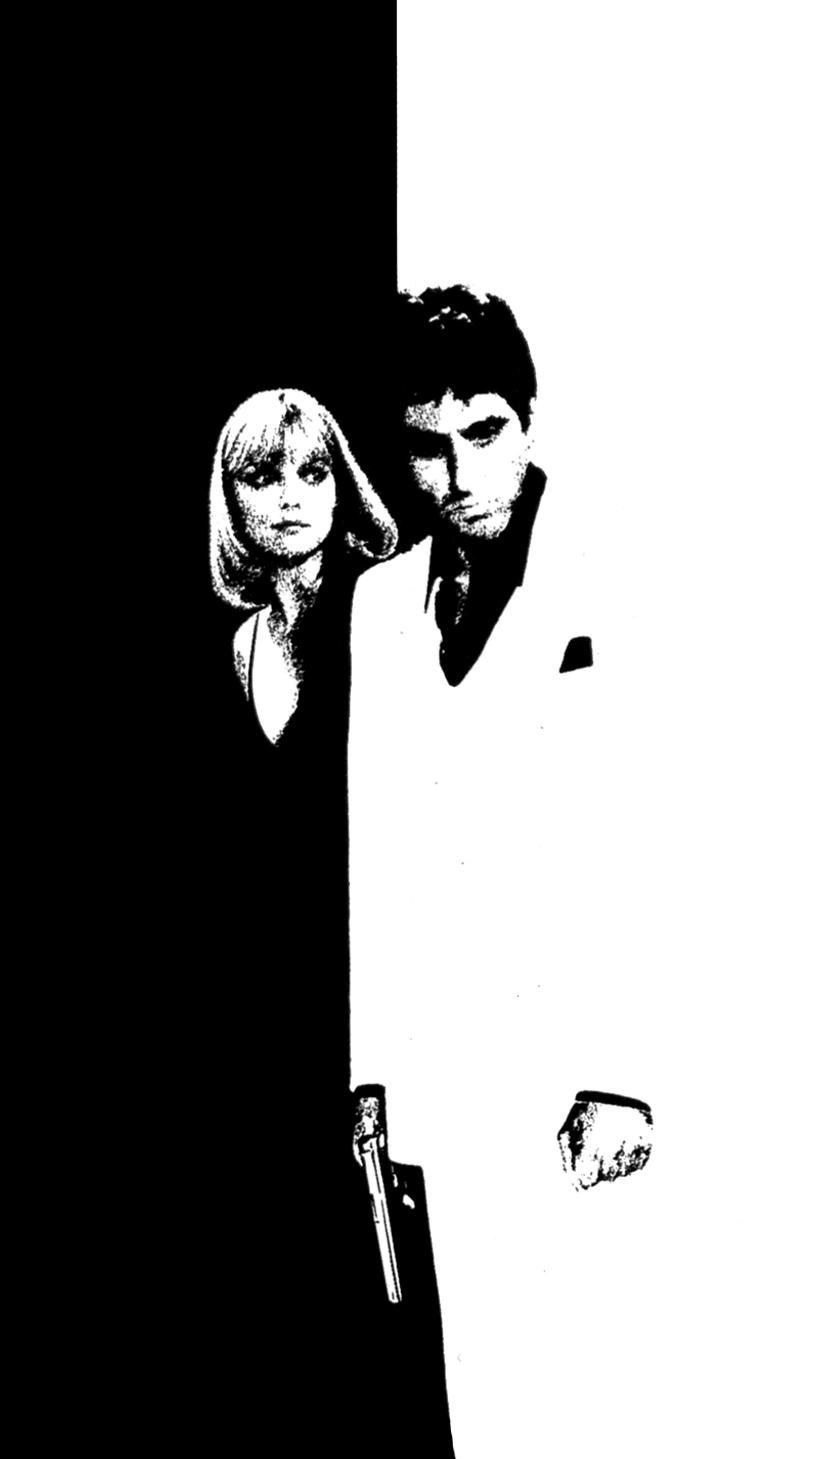 Aesthetic Films by Brian De Palma ideas. scarface movie, scarface poster, scarface